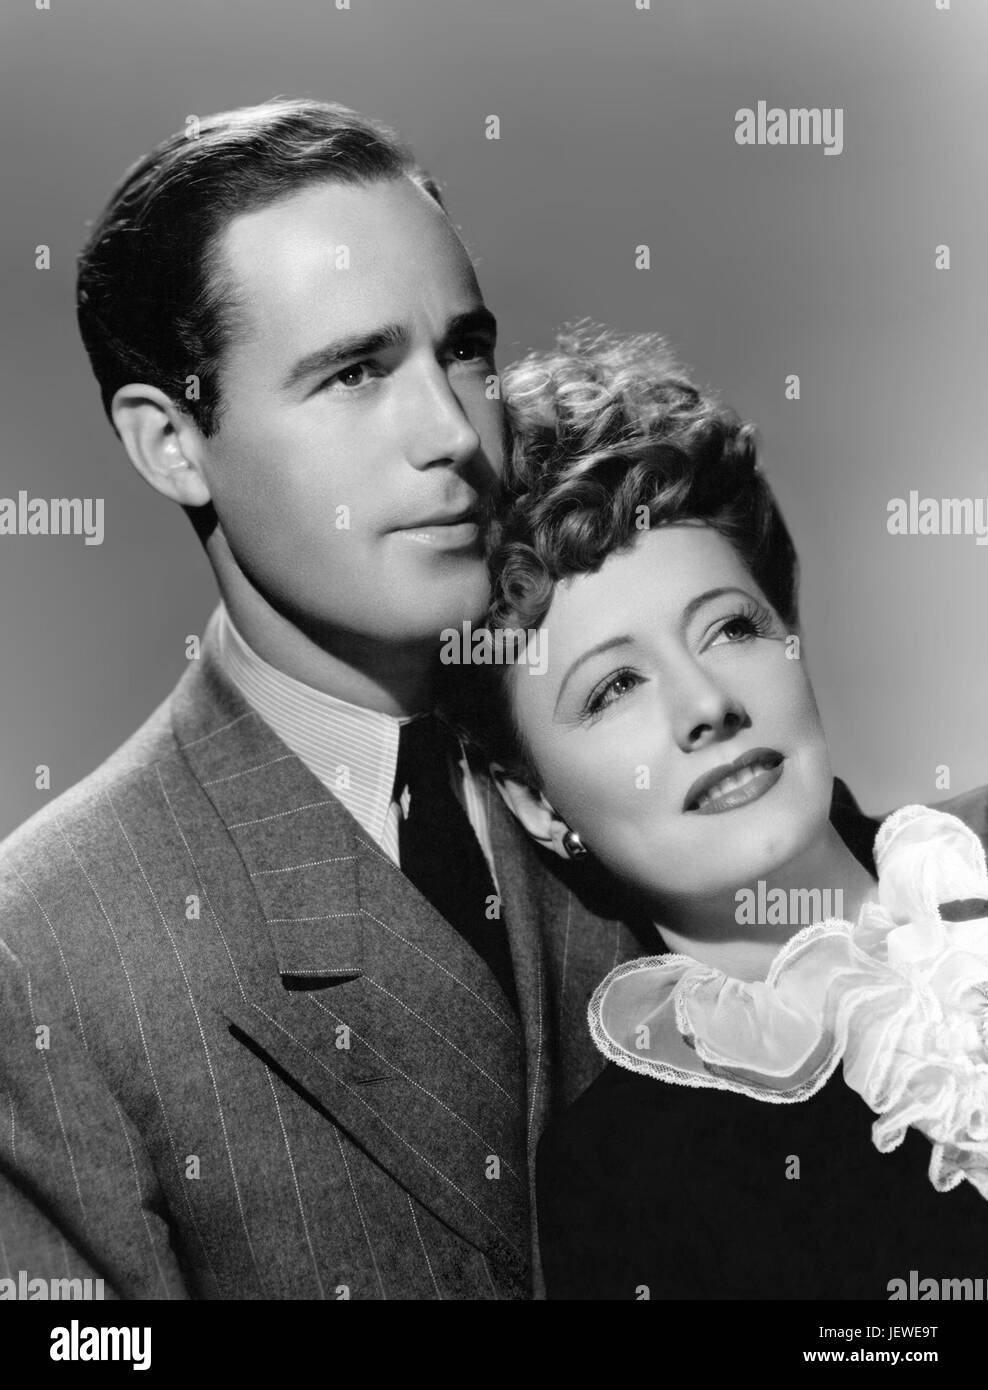 LADY IN A JAM 1942 Universal Pictures Film mit Irene Dunn und Patrick Knowles Stockfoto